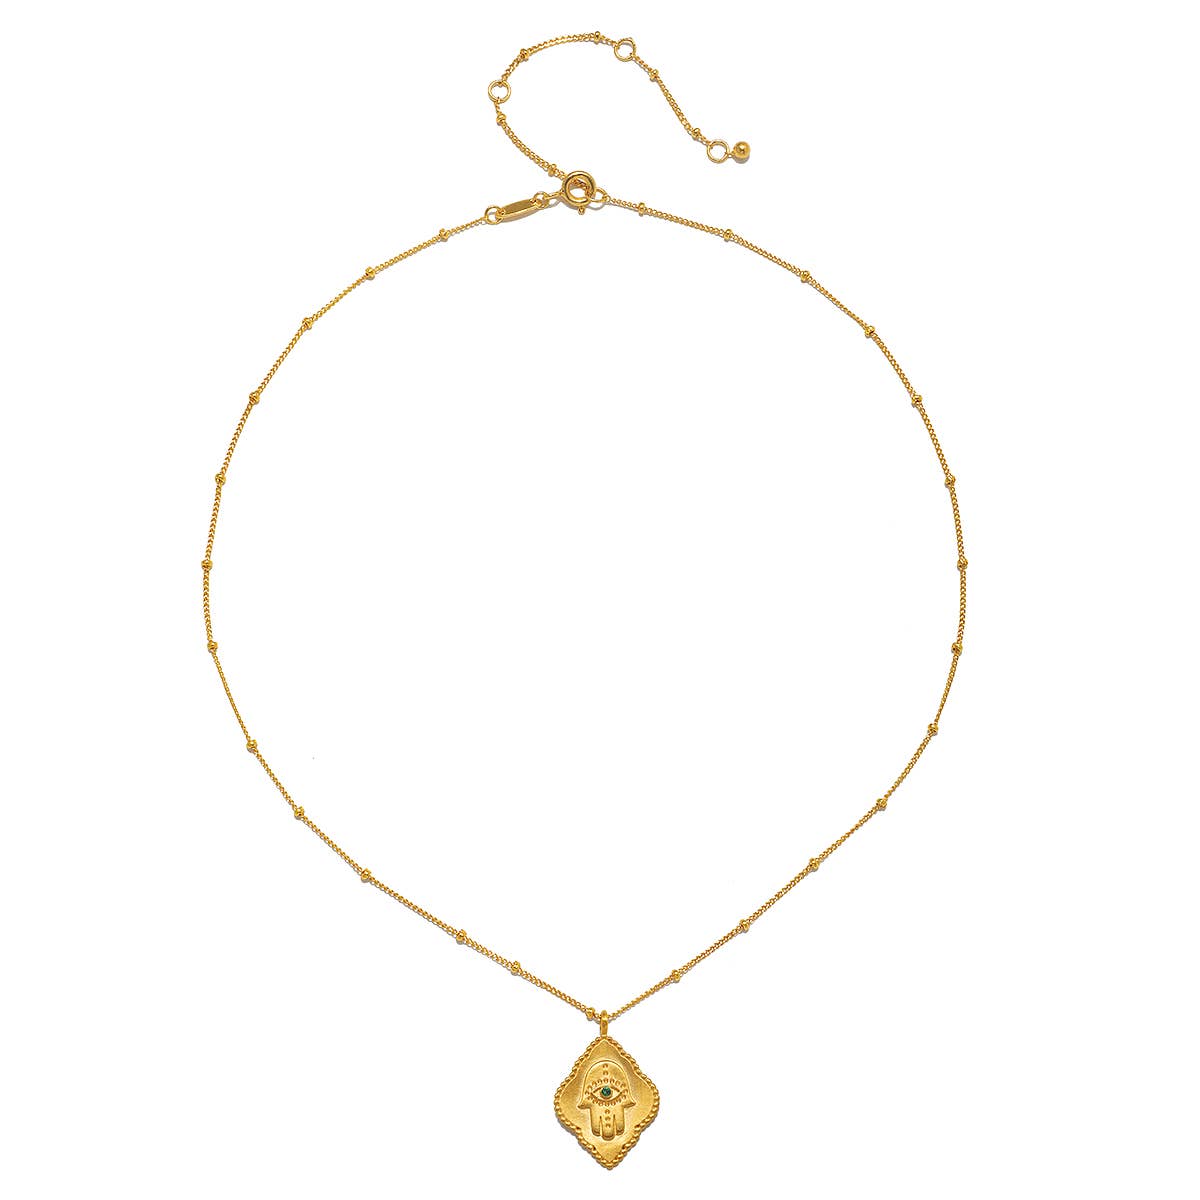 satya cradled in protection necklace